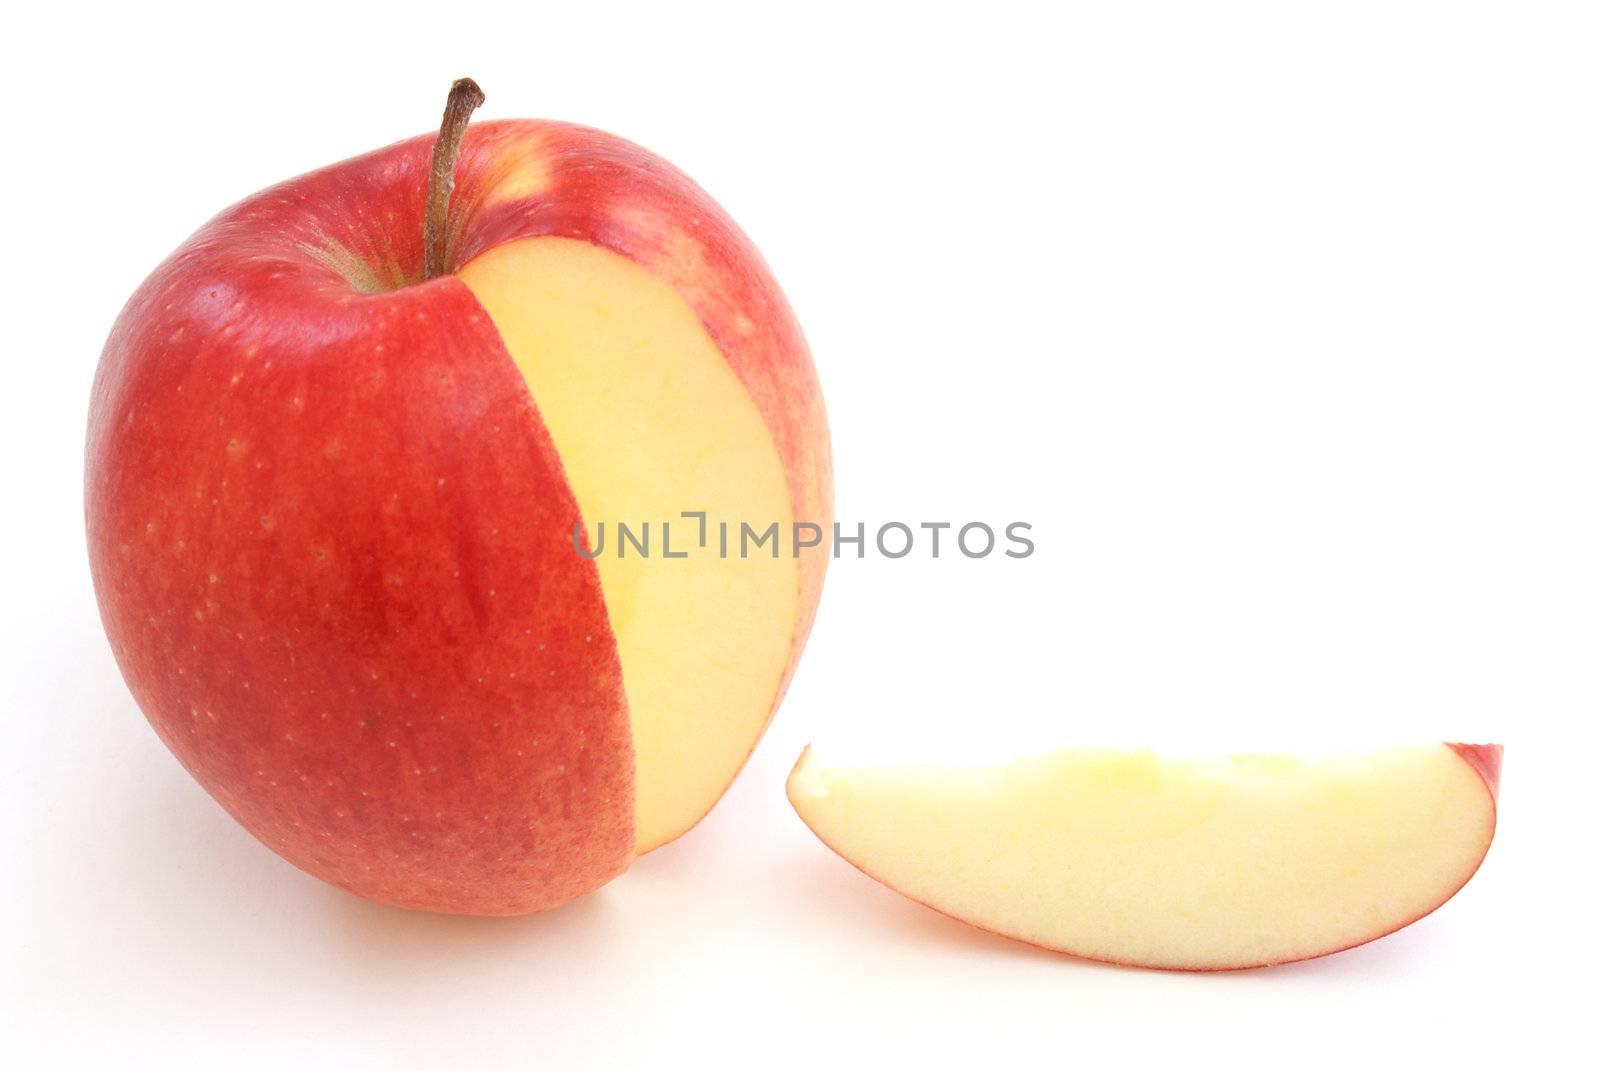 A slice out of a bright red apple.